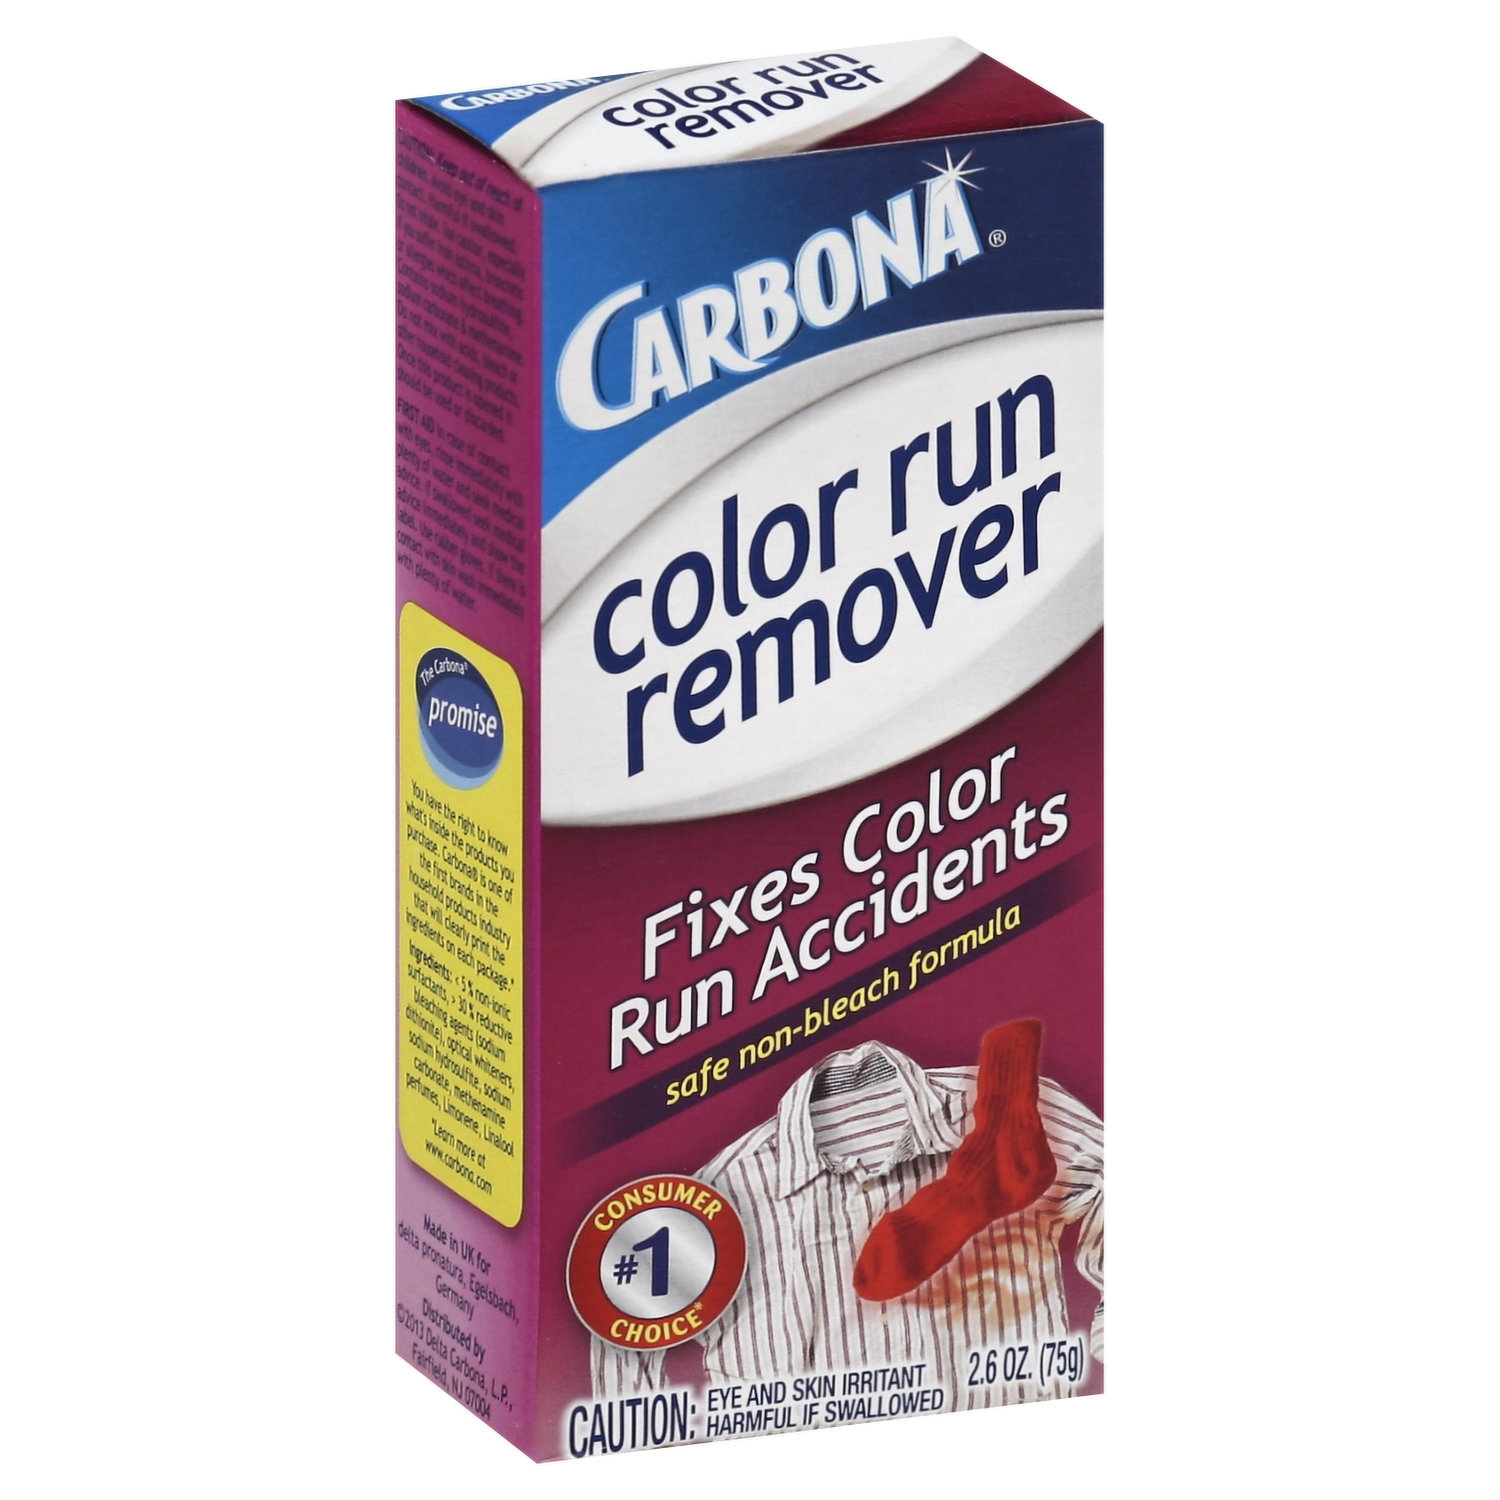 Carbona Stain Remover for Free for Super Cheap at Publix :: Southern Savers